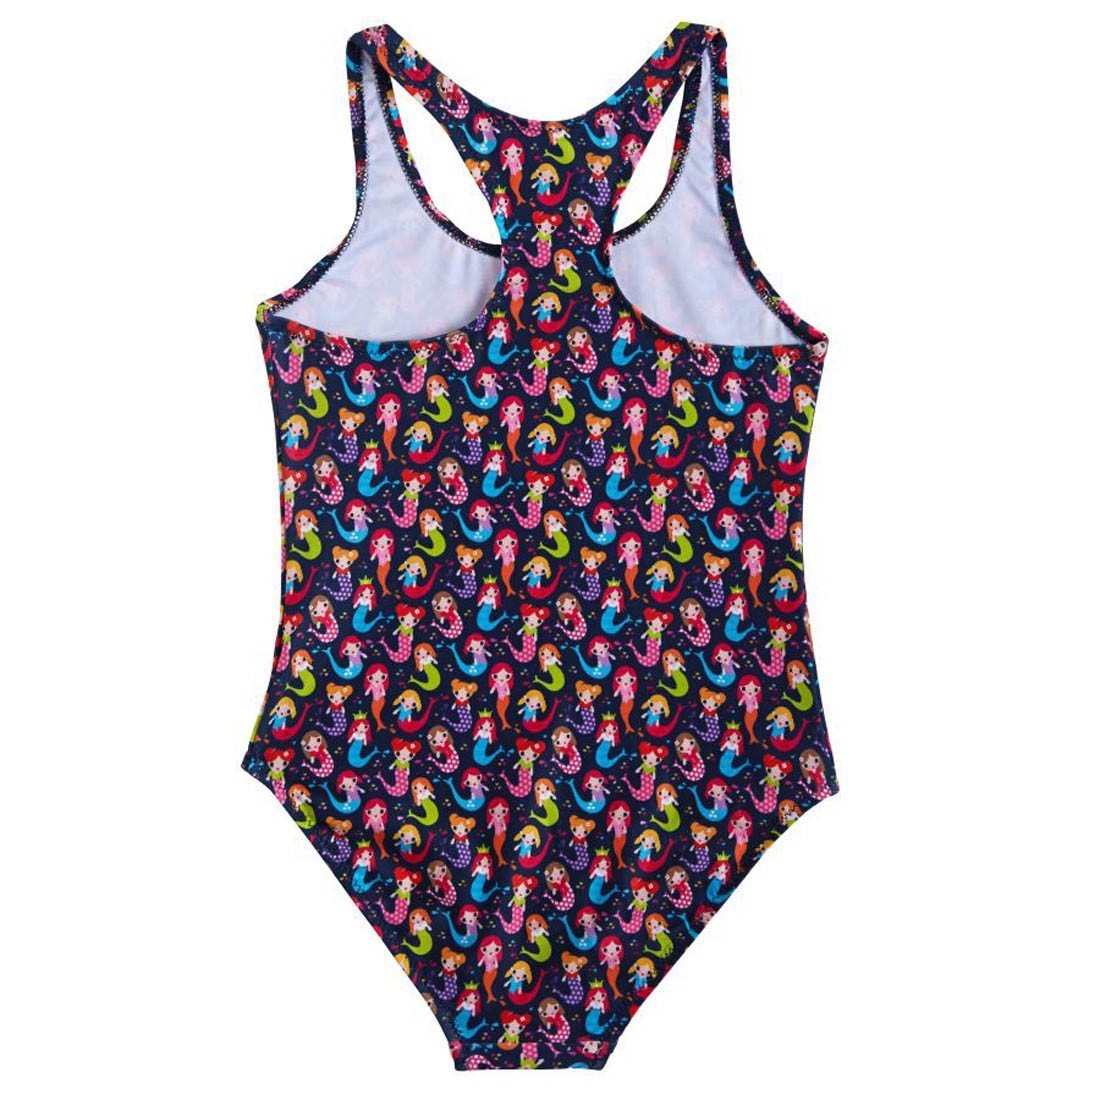 Order SlipStop Mermaid Swimsuit - SlipStop, delivered to your home ...